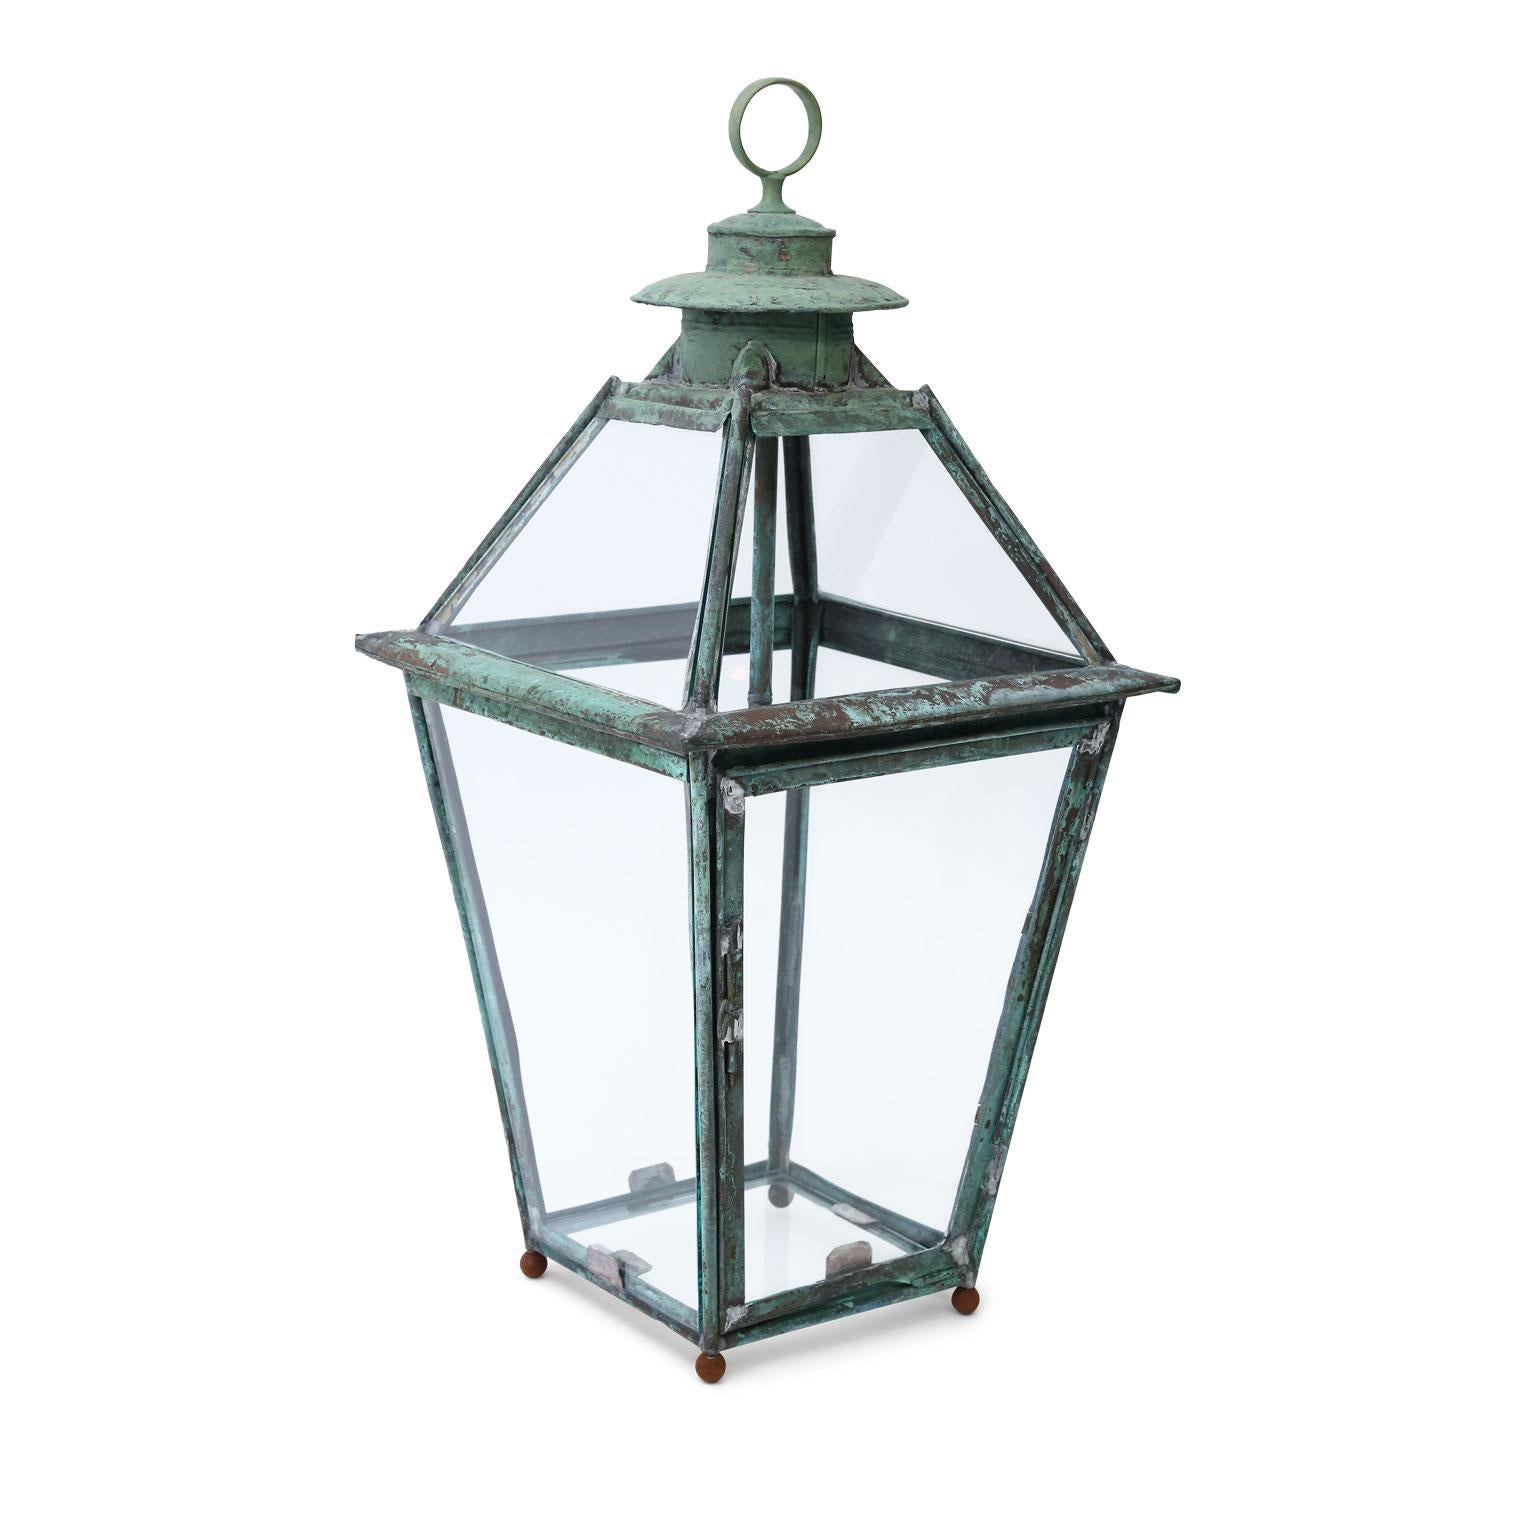 French Provincial Green Verdigris Copper and Brass French Lantern